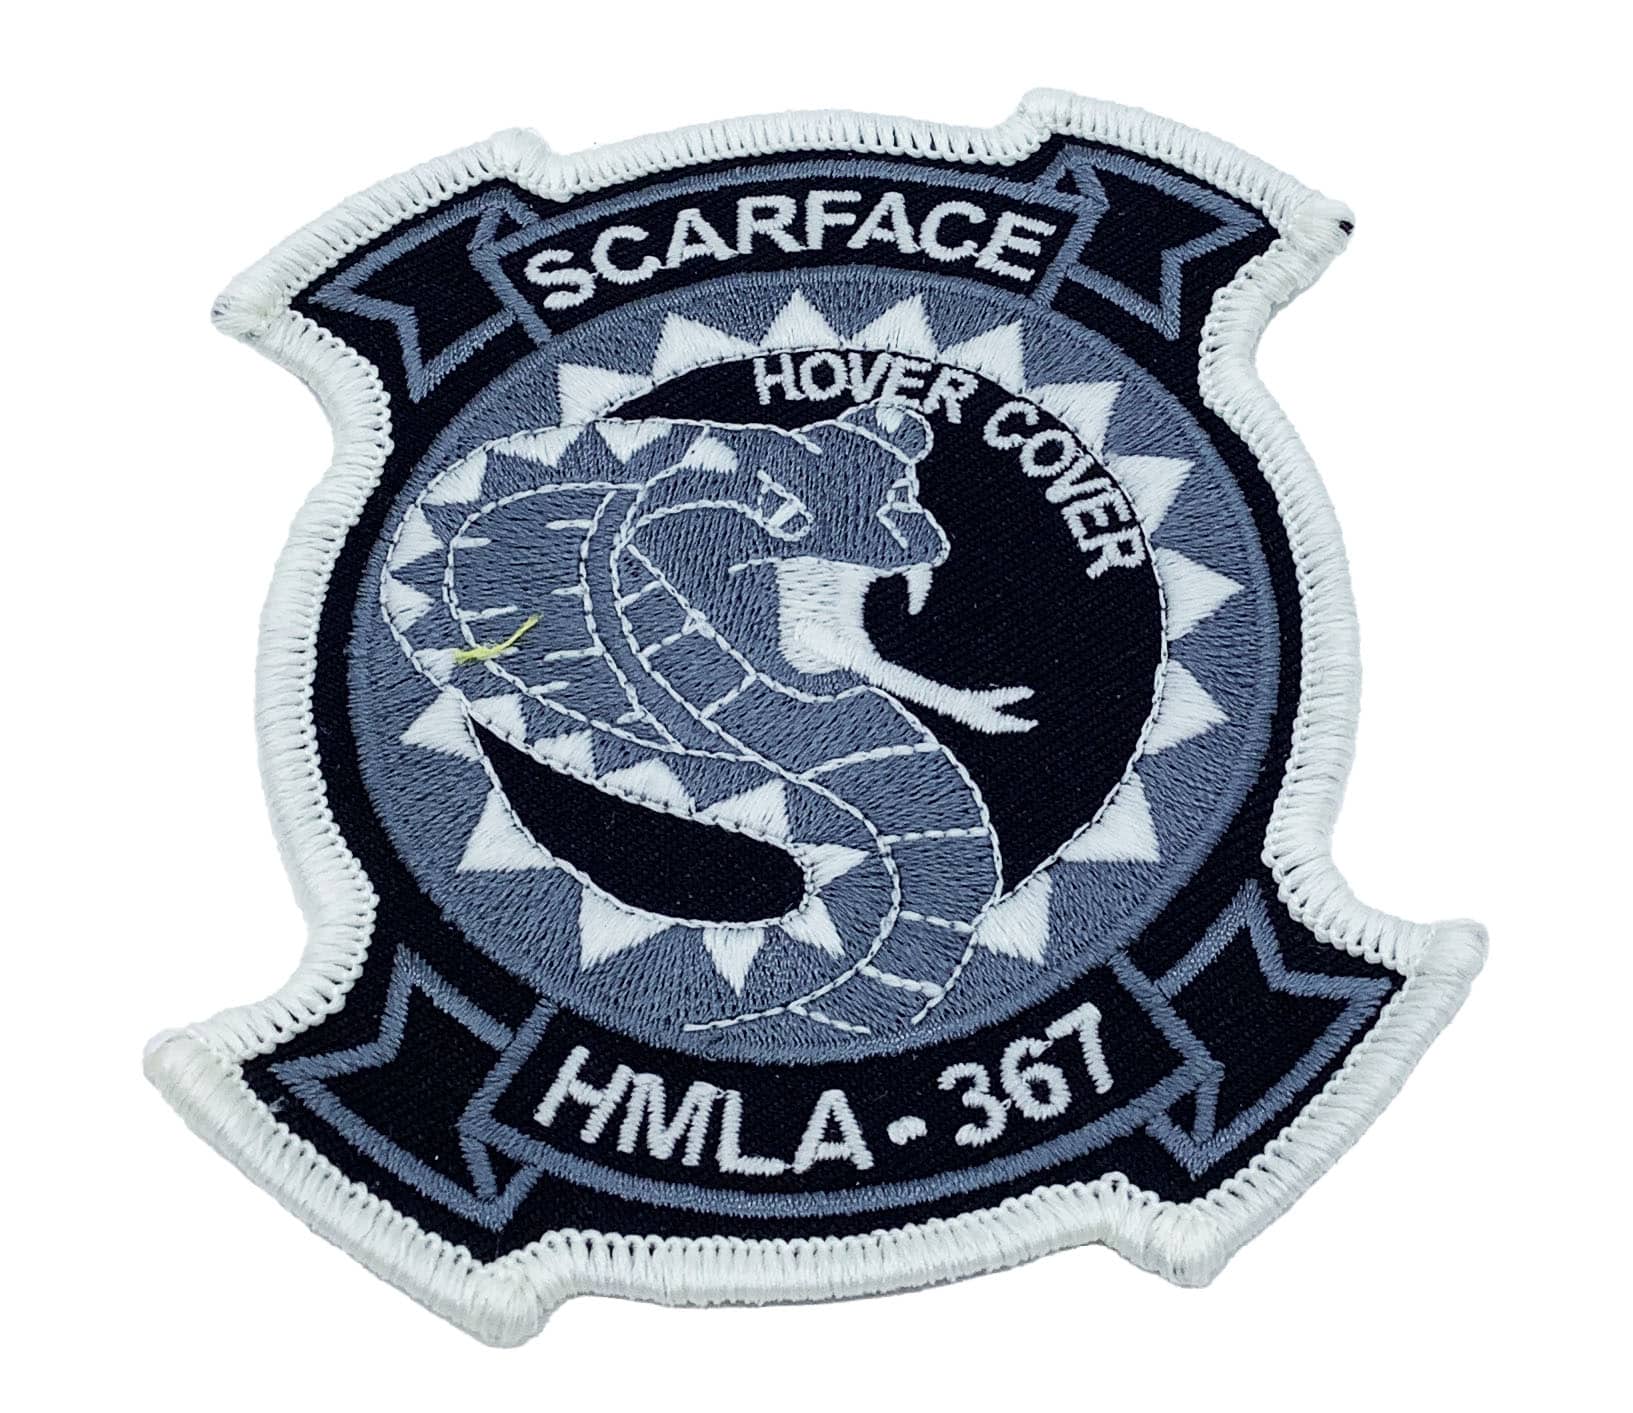 HMLA-367 Scarface Hover Cover Glow in the Dark Patch - Sew On